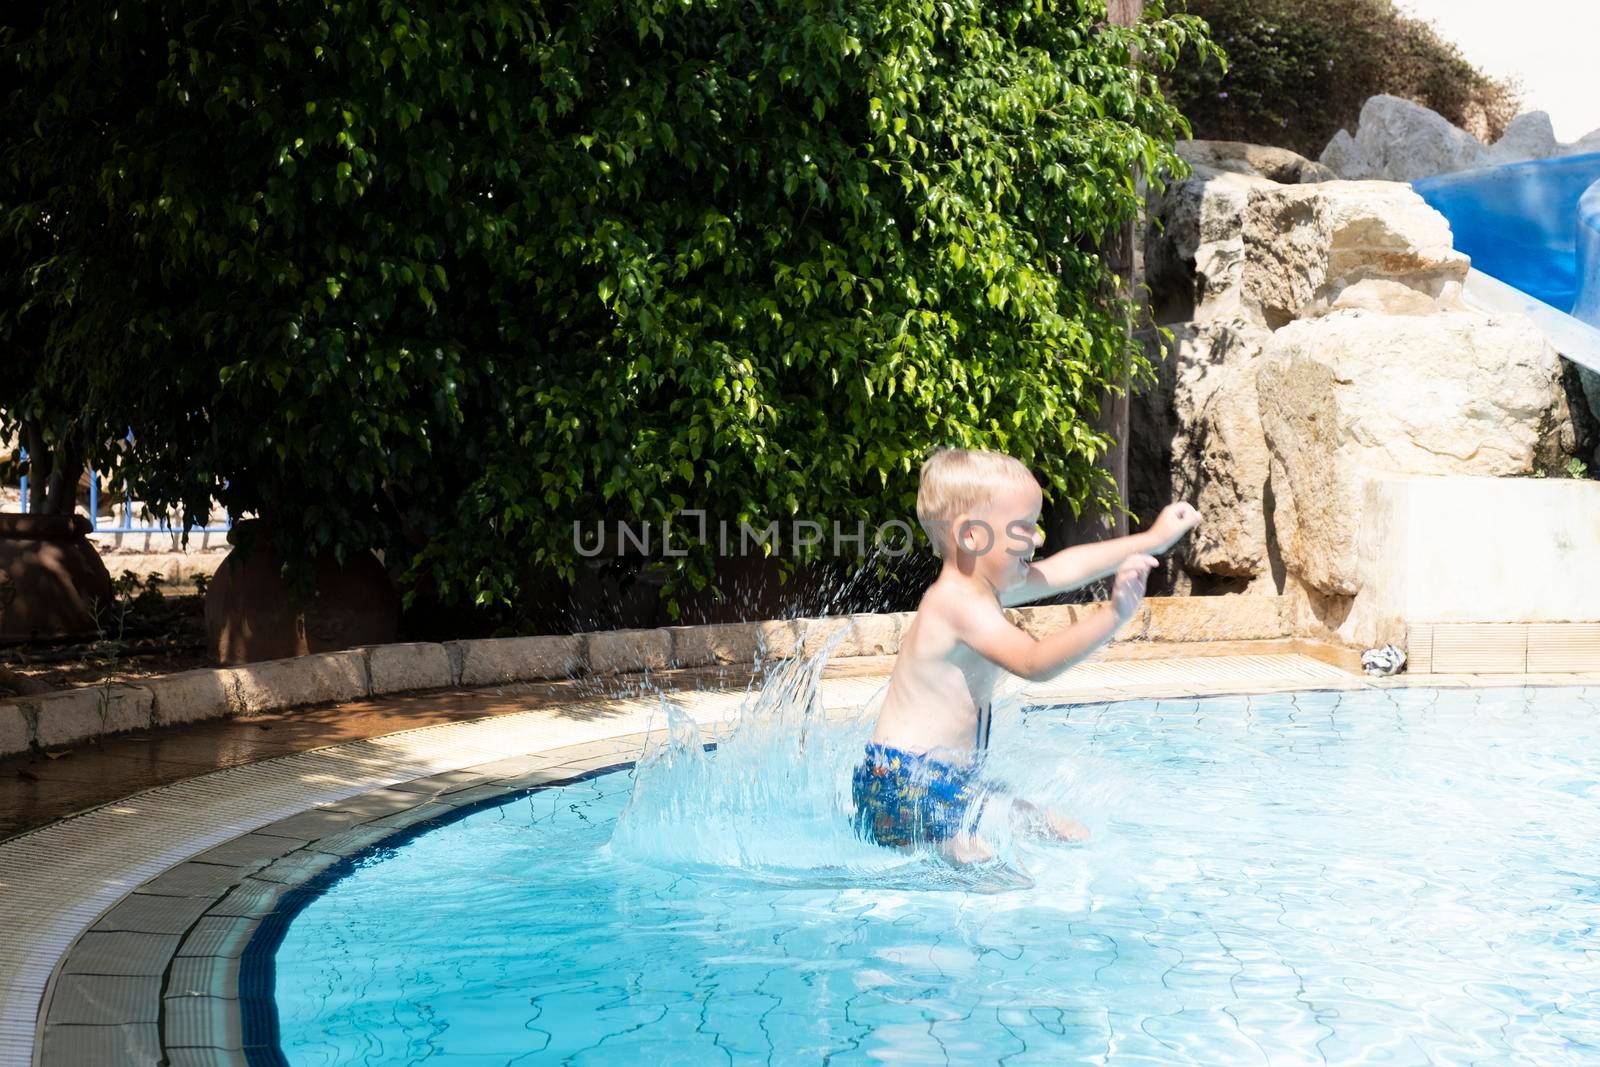 A happy smiling child jumps and dives under the water in the pool on a clear day. by designprojects